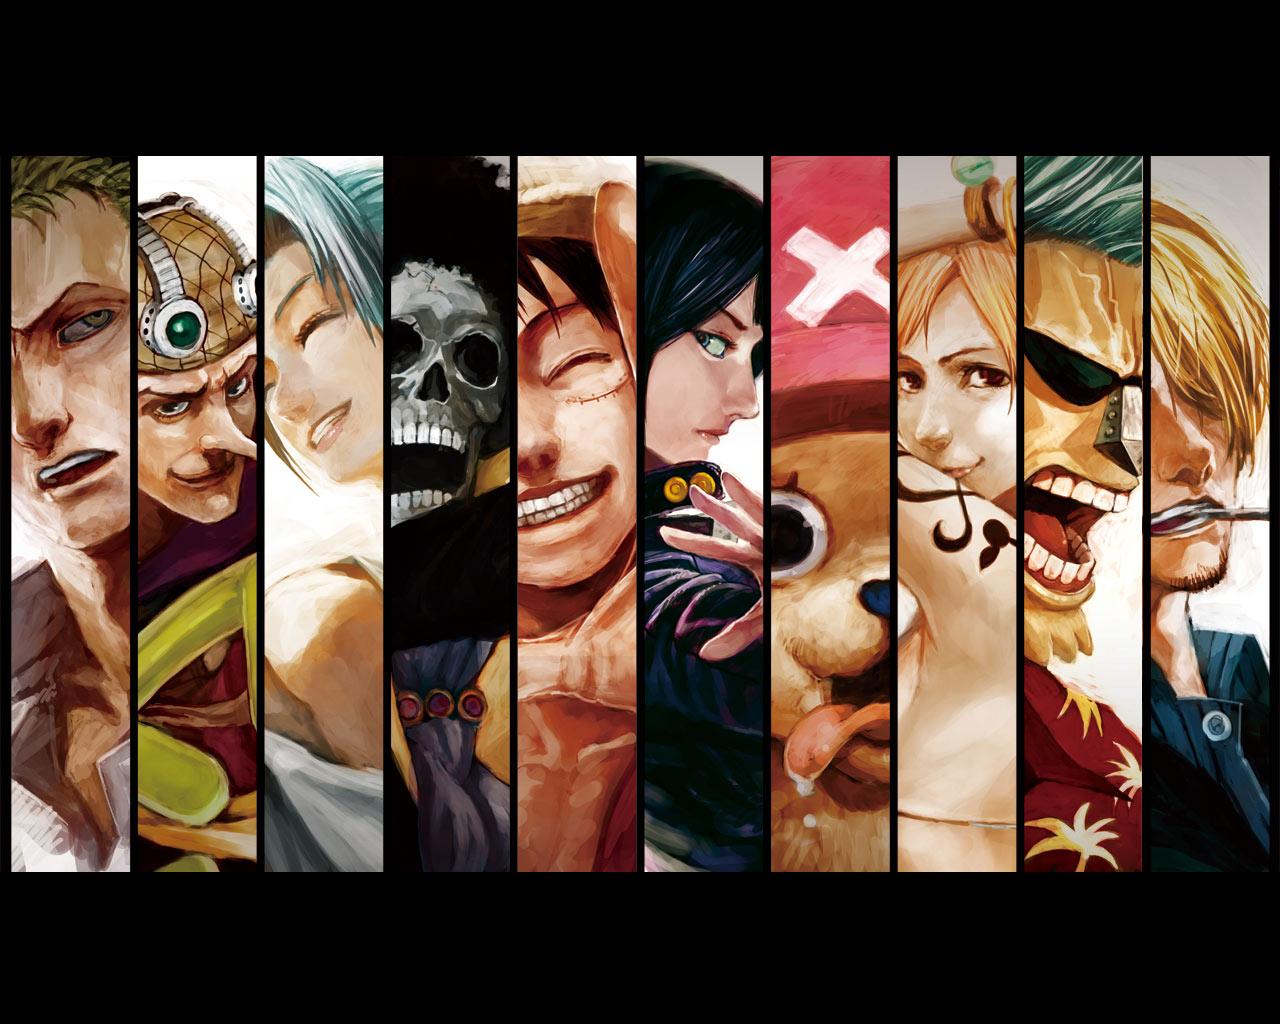 Gallery For > One Piece Full Crew Wallpaper